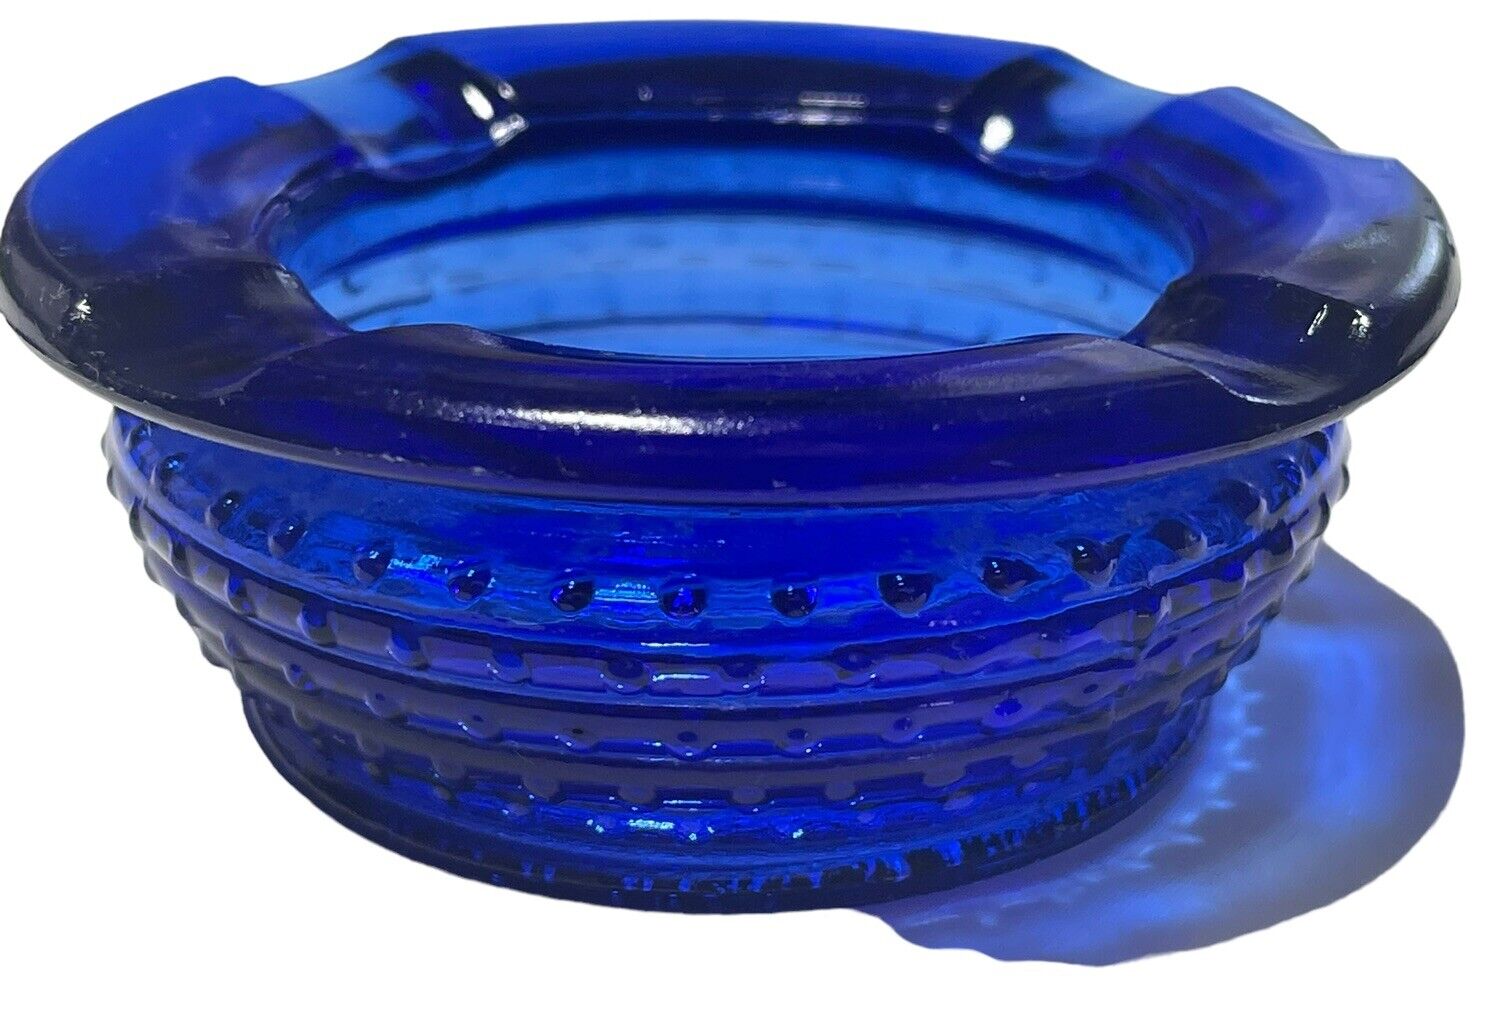 Vintage Cobalt Blue Hobnail Glass Ashtrays 3.25 Inches Wide - Marked With #5